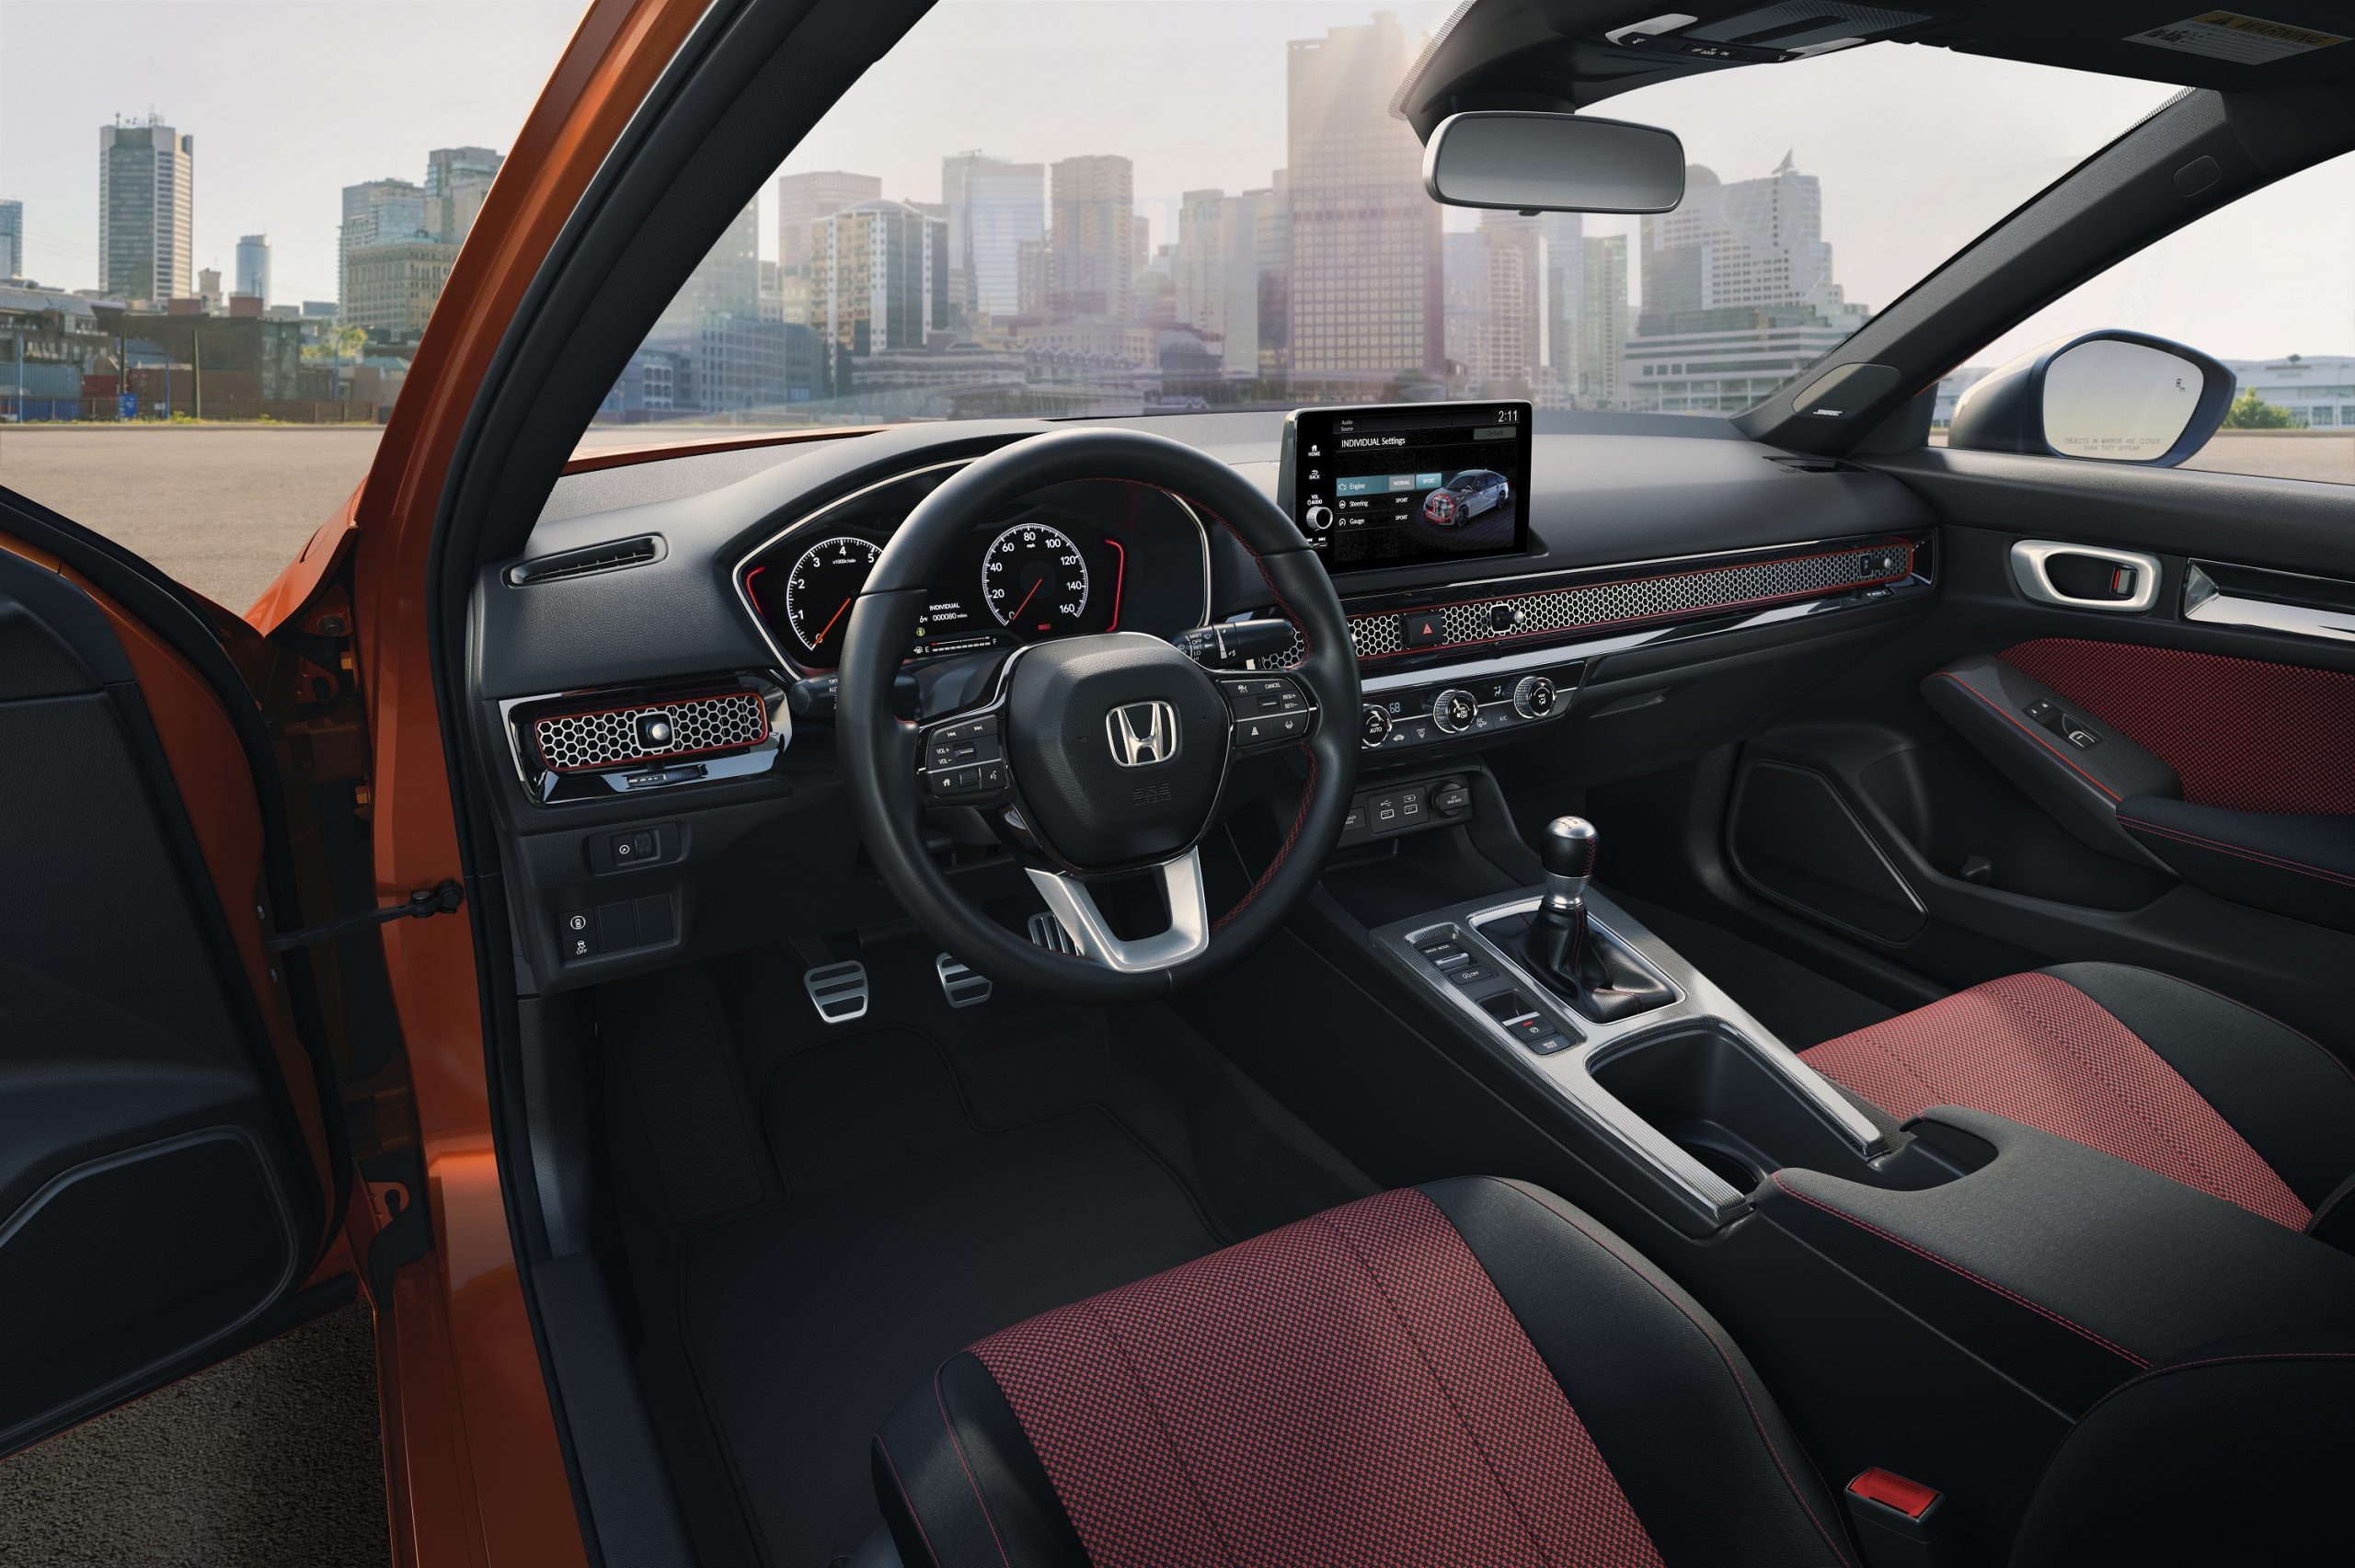 The red-accented of the new Civic Si with a manual transmission